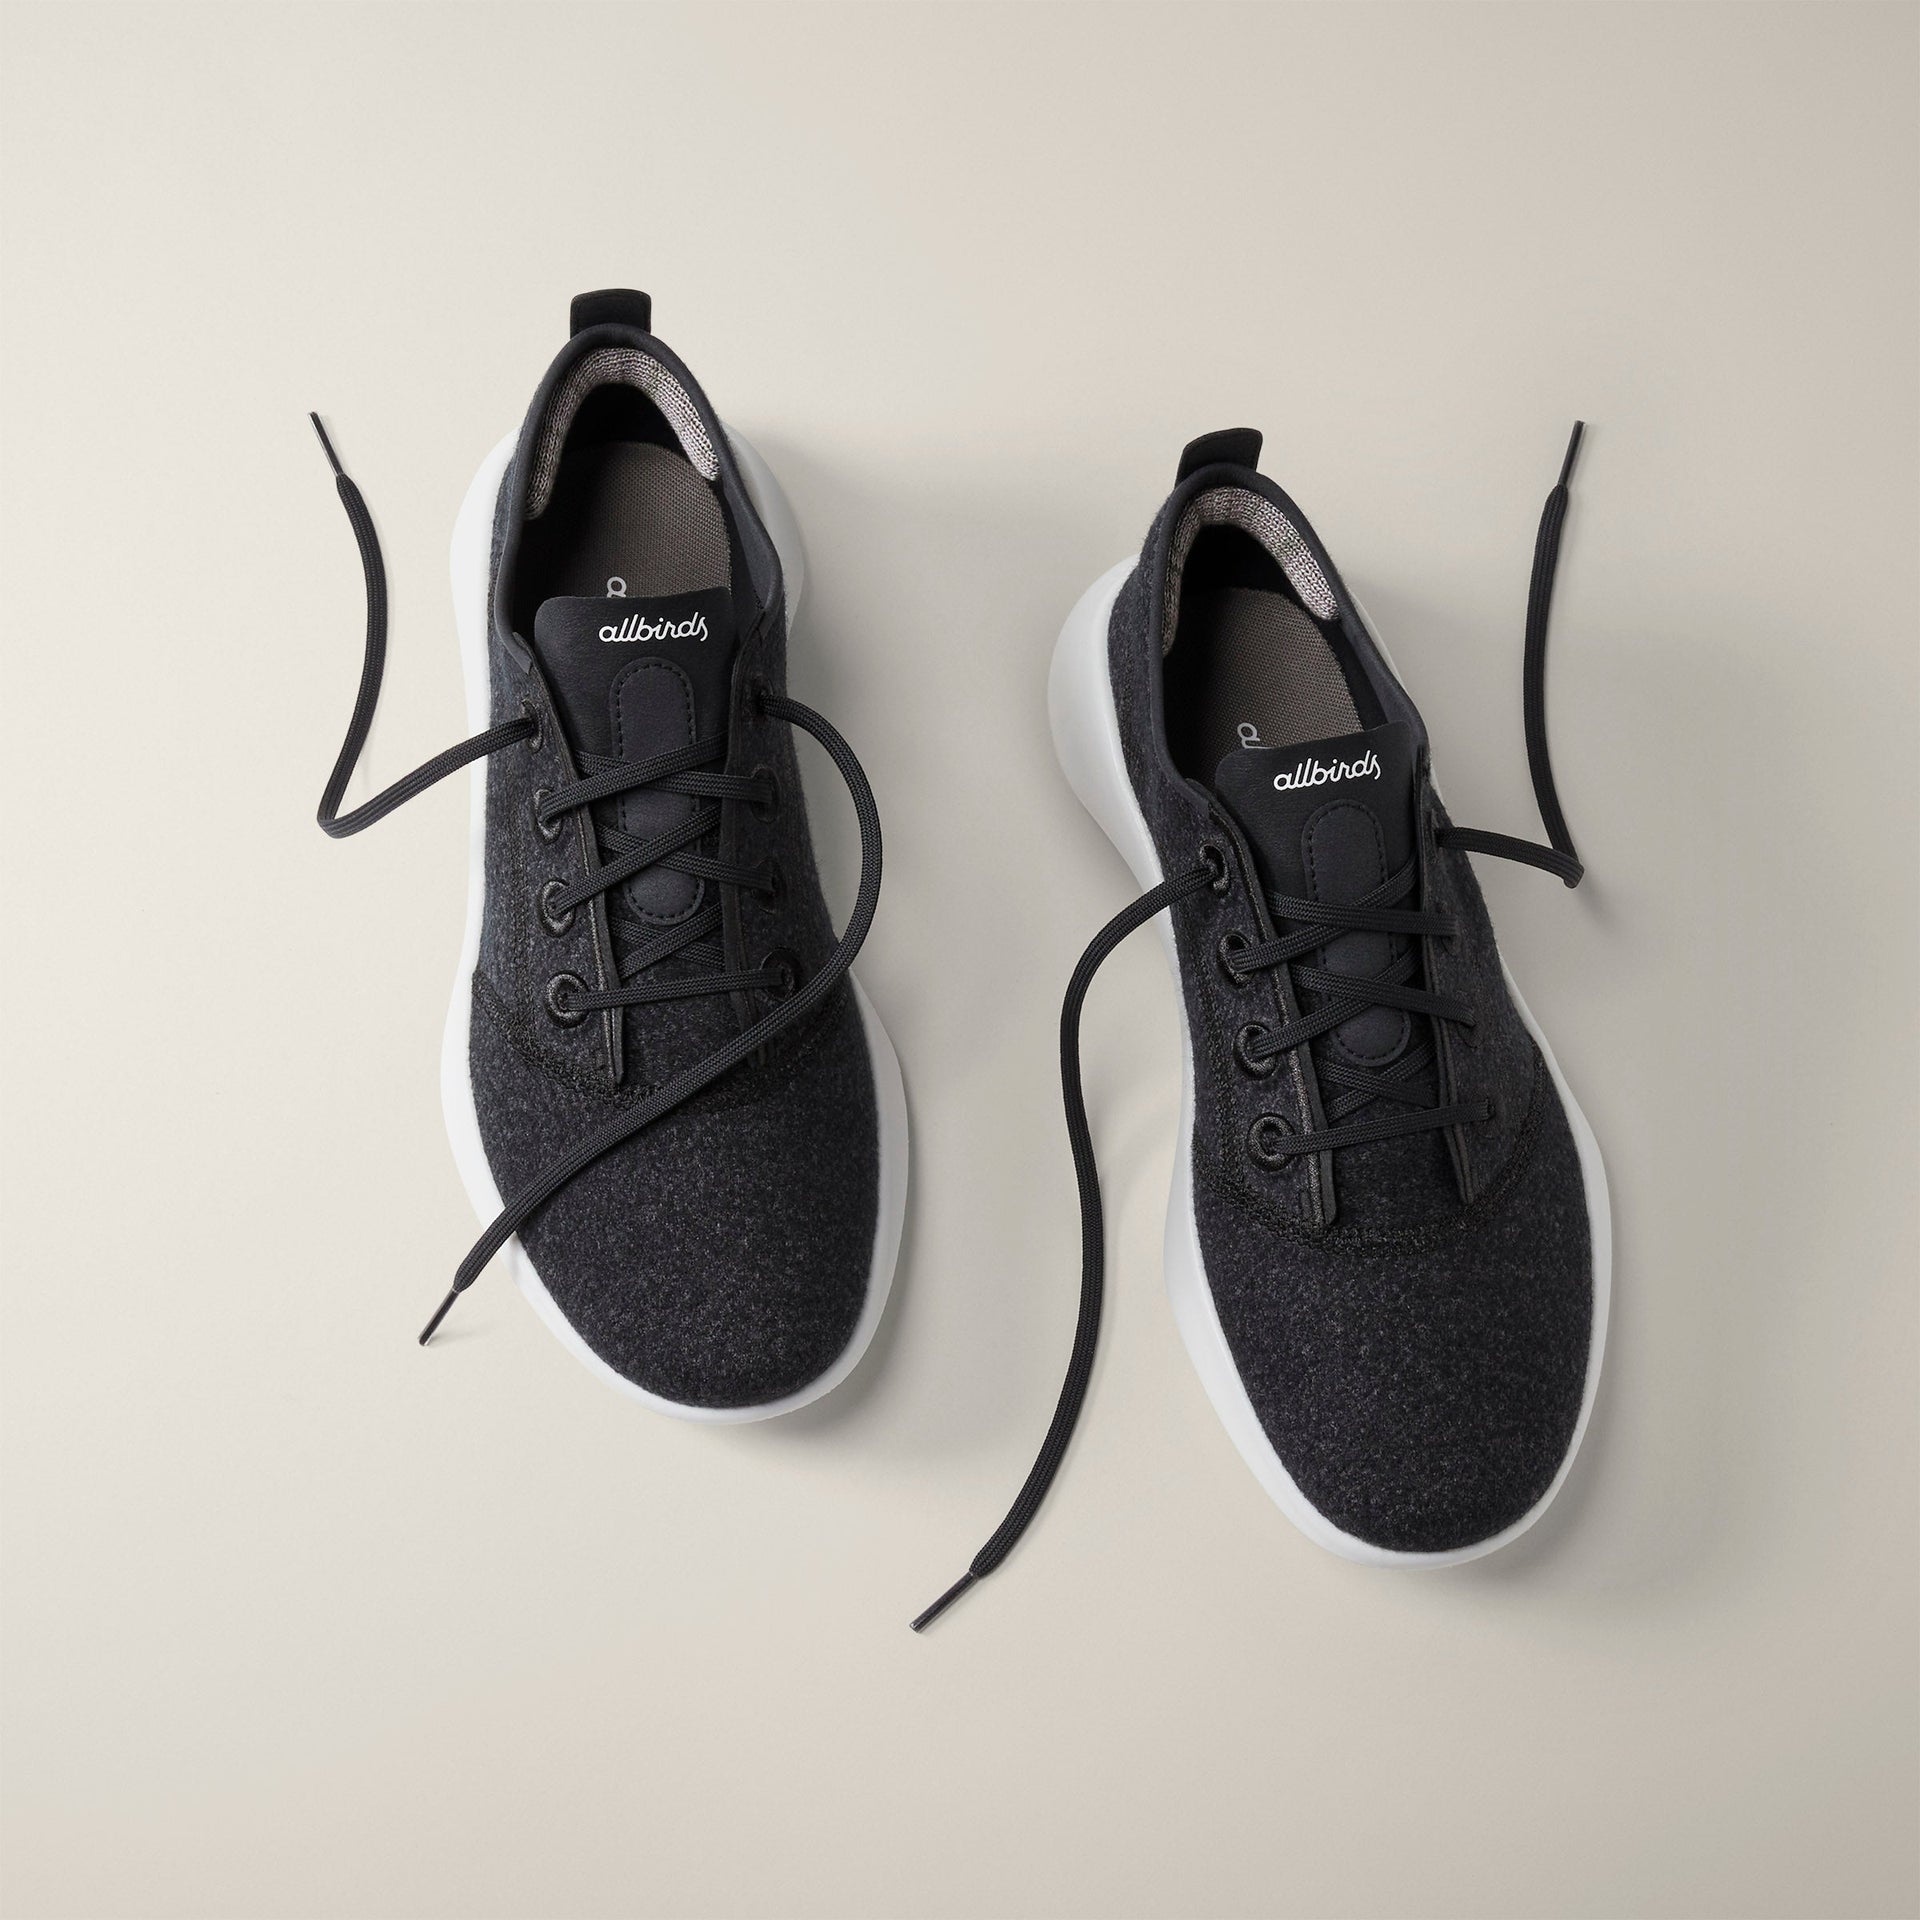 SuperLight Wool Runners pour hommes - Natural Black (Blizzard)